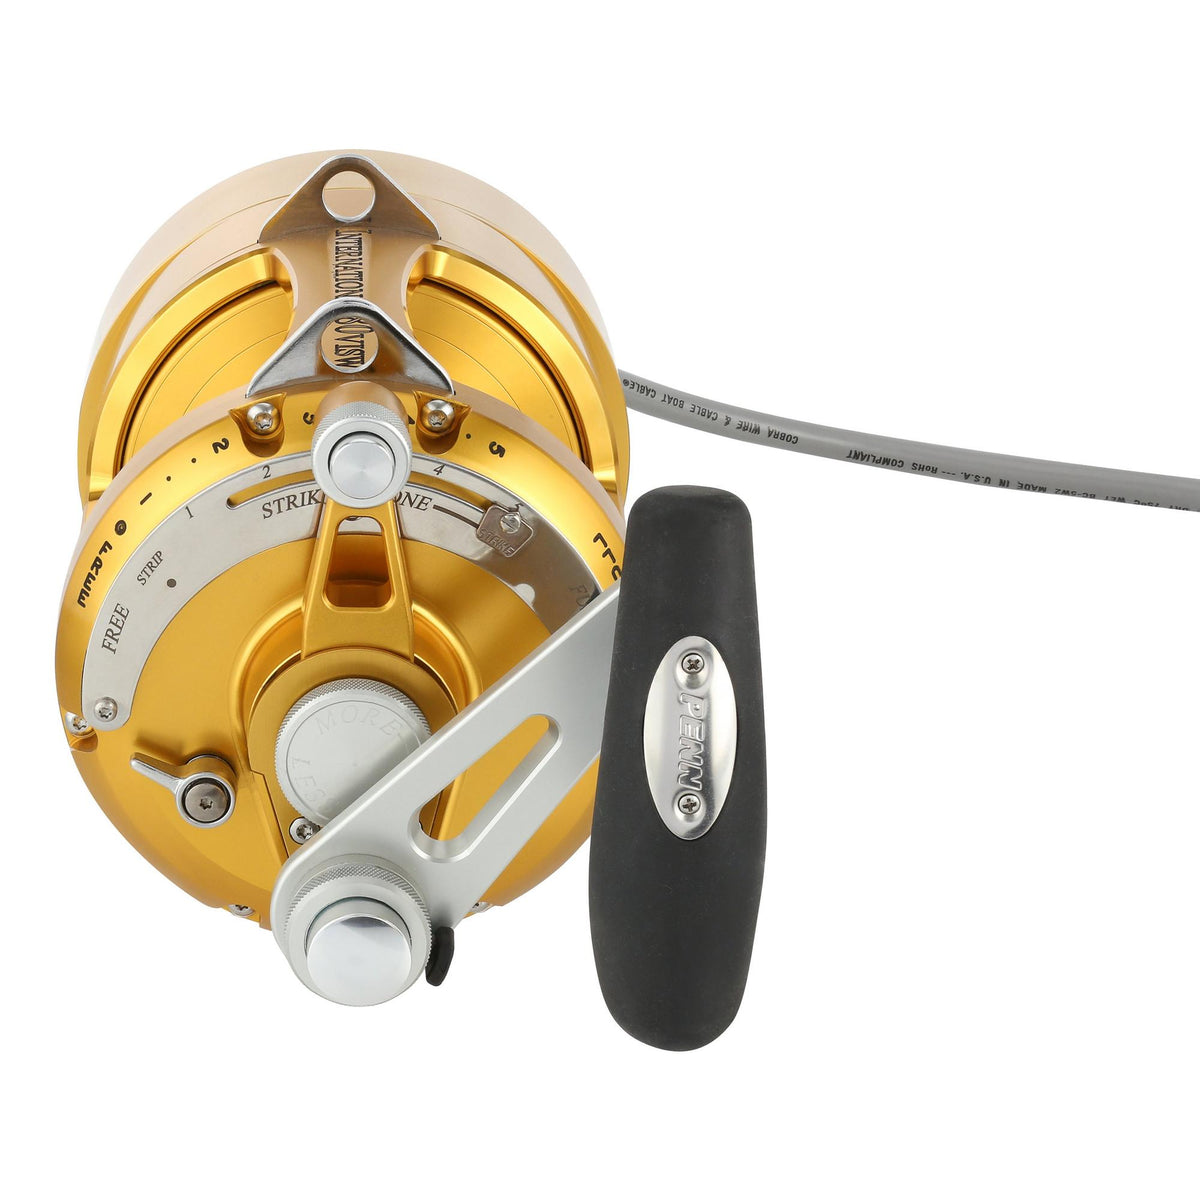 Unboxing a $5,000 reel. Our first look at the Hooker 80 Penn